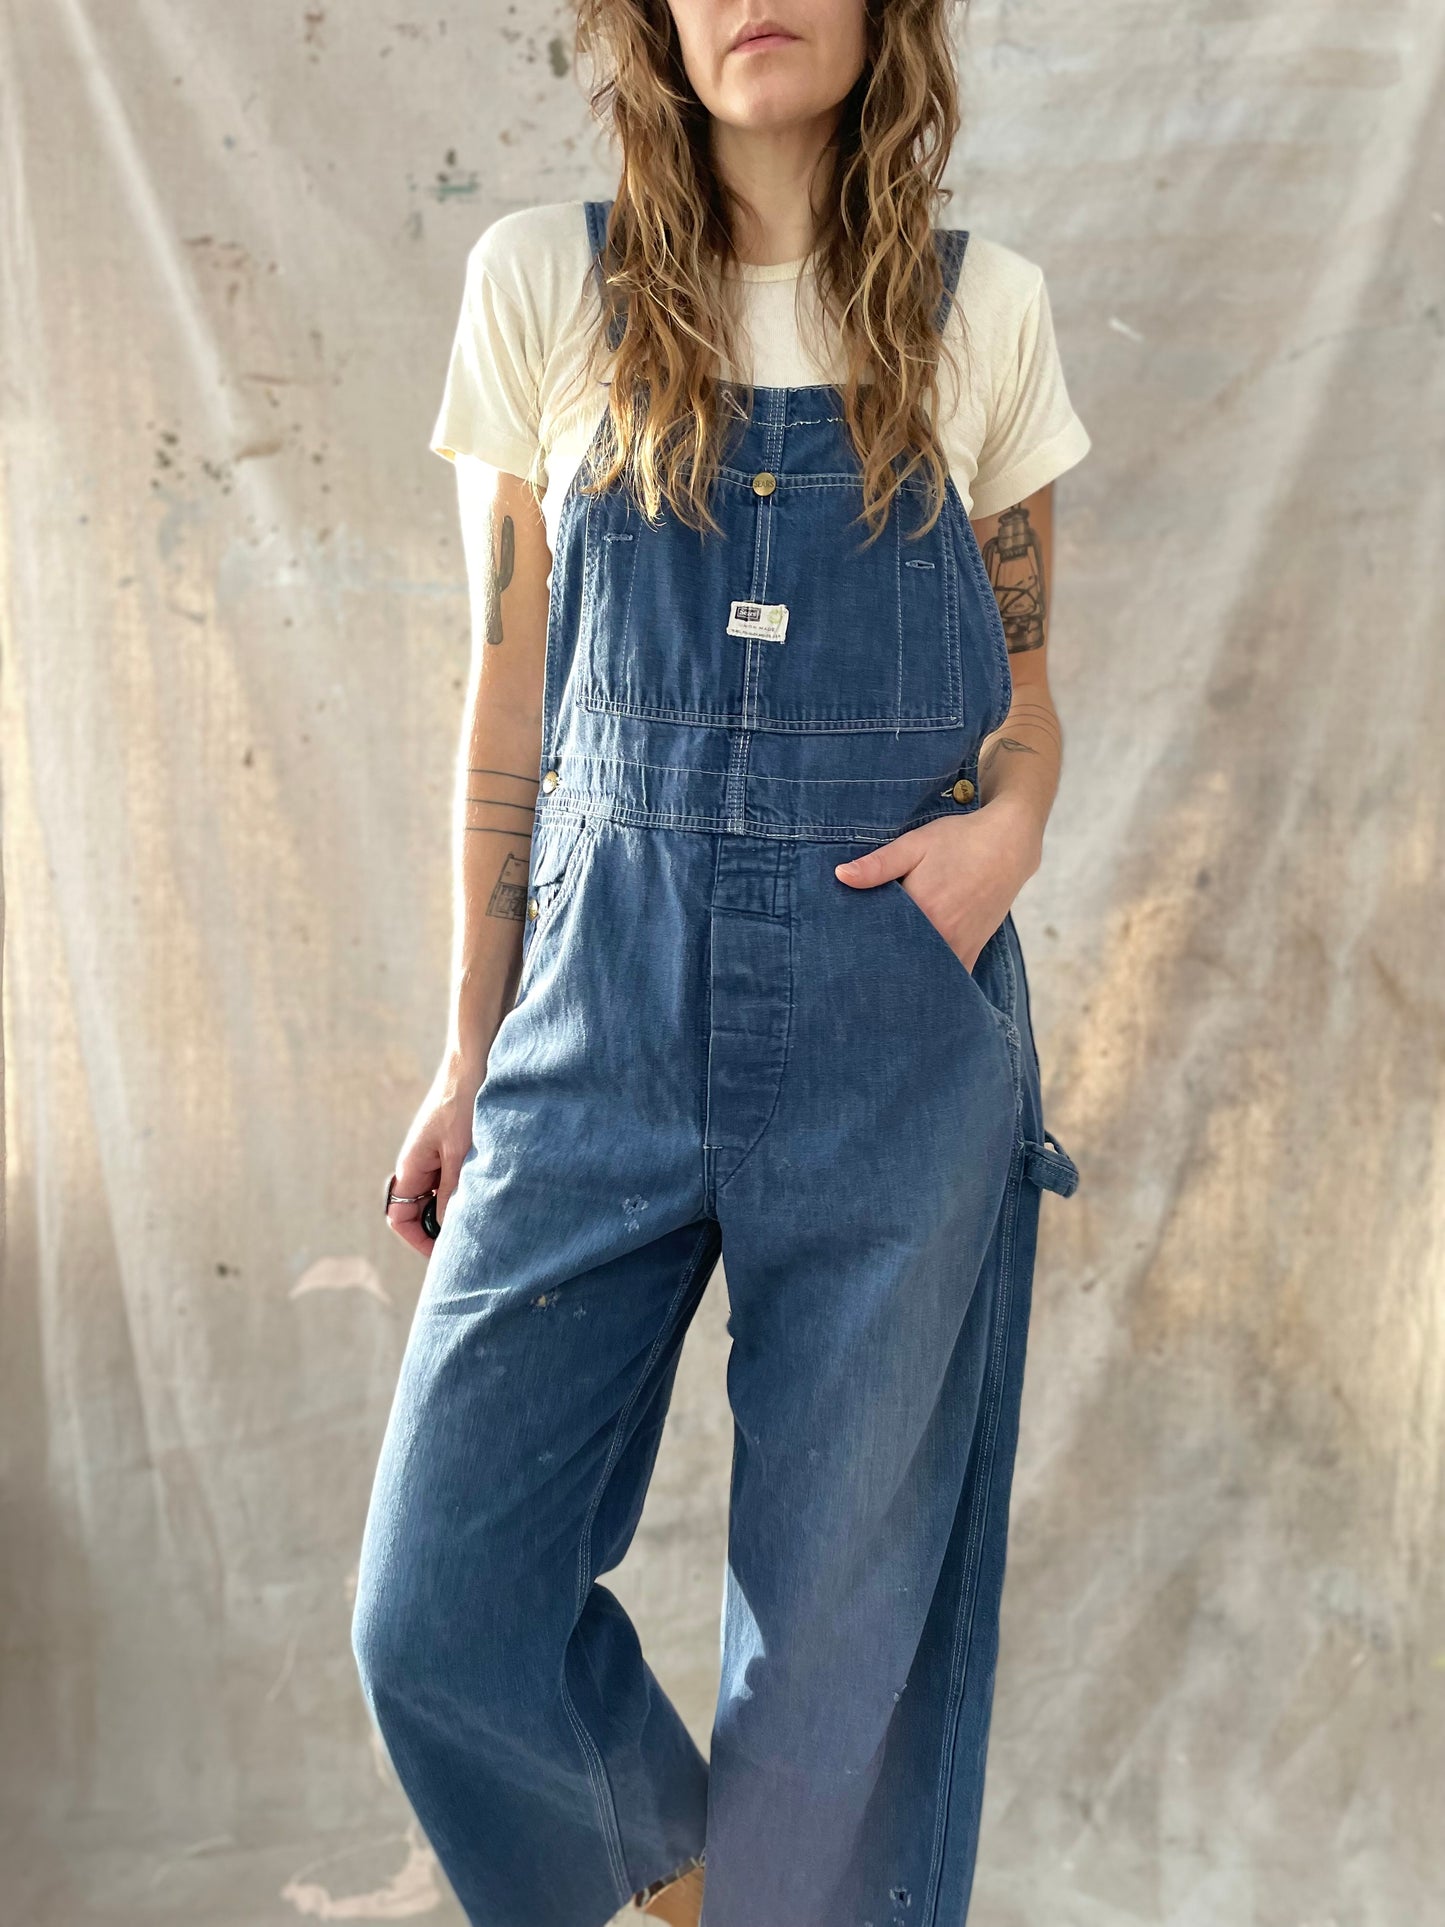 70s Sears Roebuck Cropped Overalls